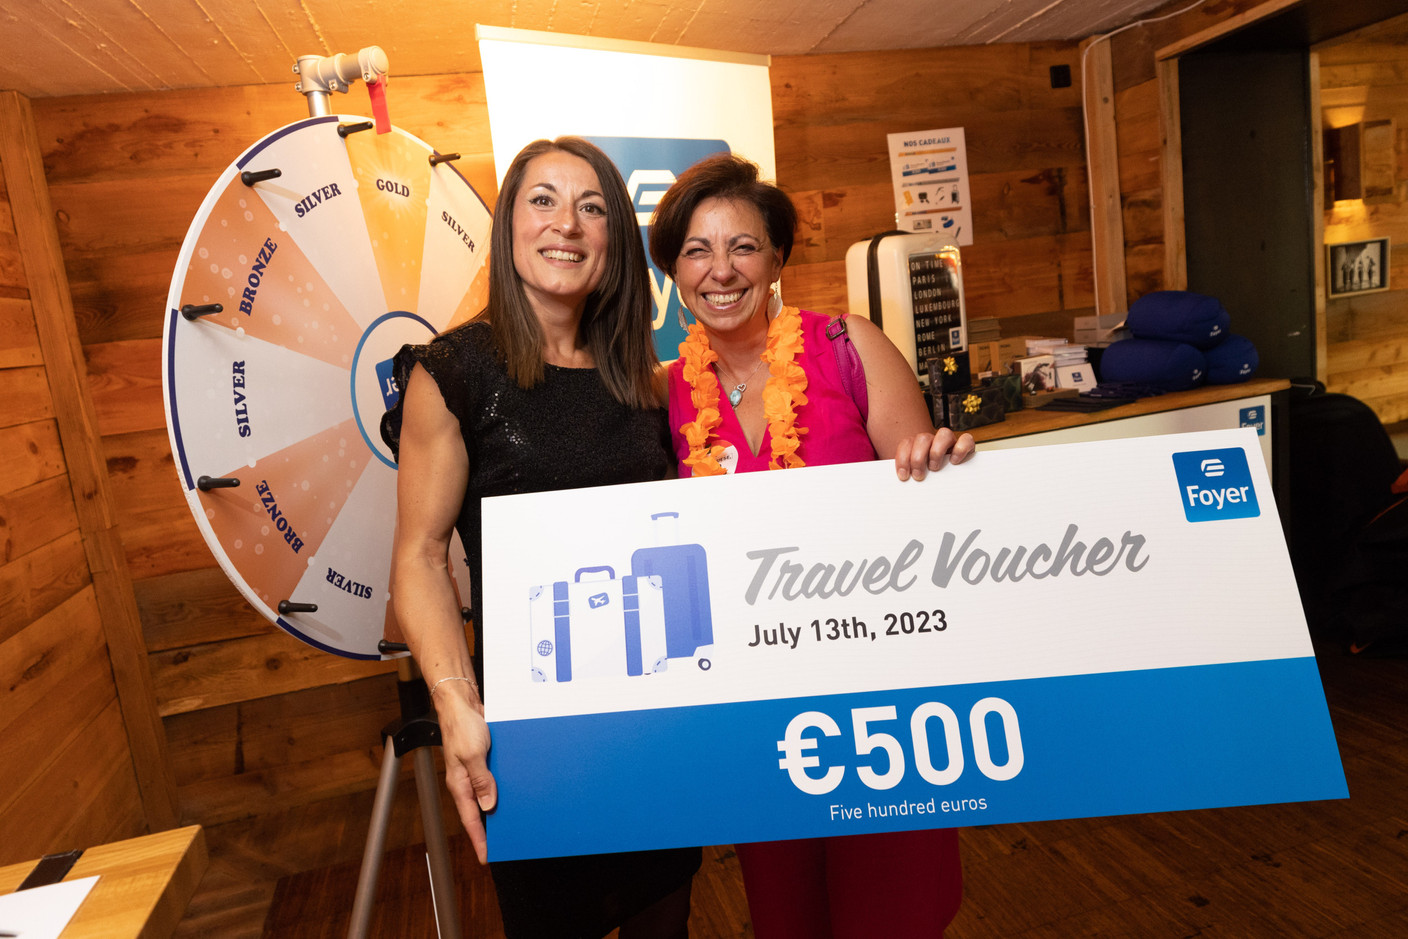 Luisa Peixoto (Foyer) and Teresa Rehlinger (Immo Teresa), who won a €500 Gold Travel voucher at the Delano summer party, 13 July 2023. Photo: Guy Wolff/Maison Moderne